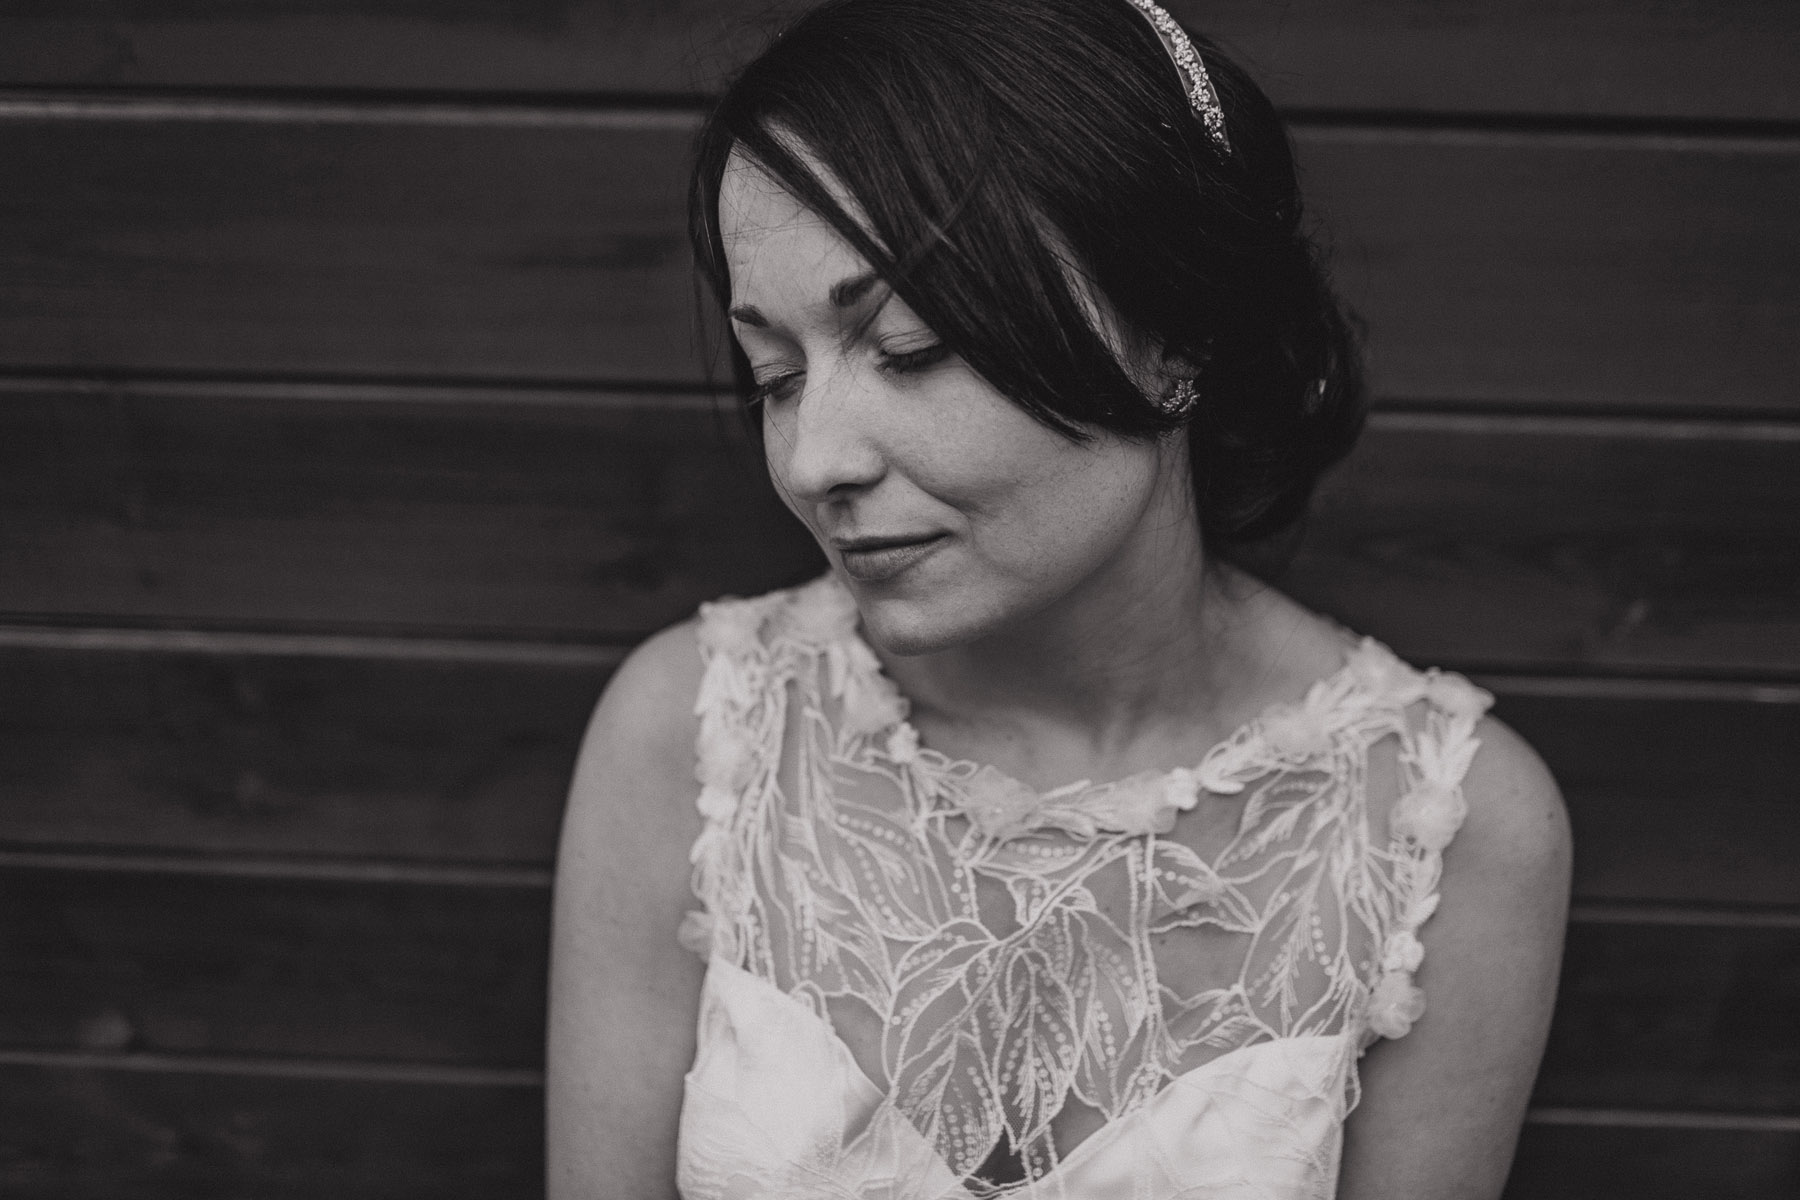 Gemma + Lloyd's delicately styled wedding photography at Losehill Country House in Hope, Derbyshire.